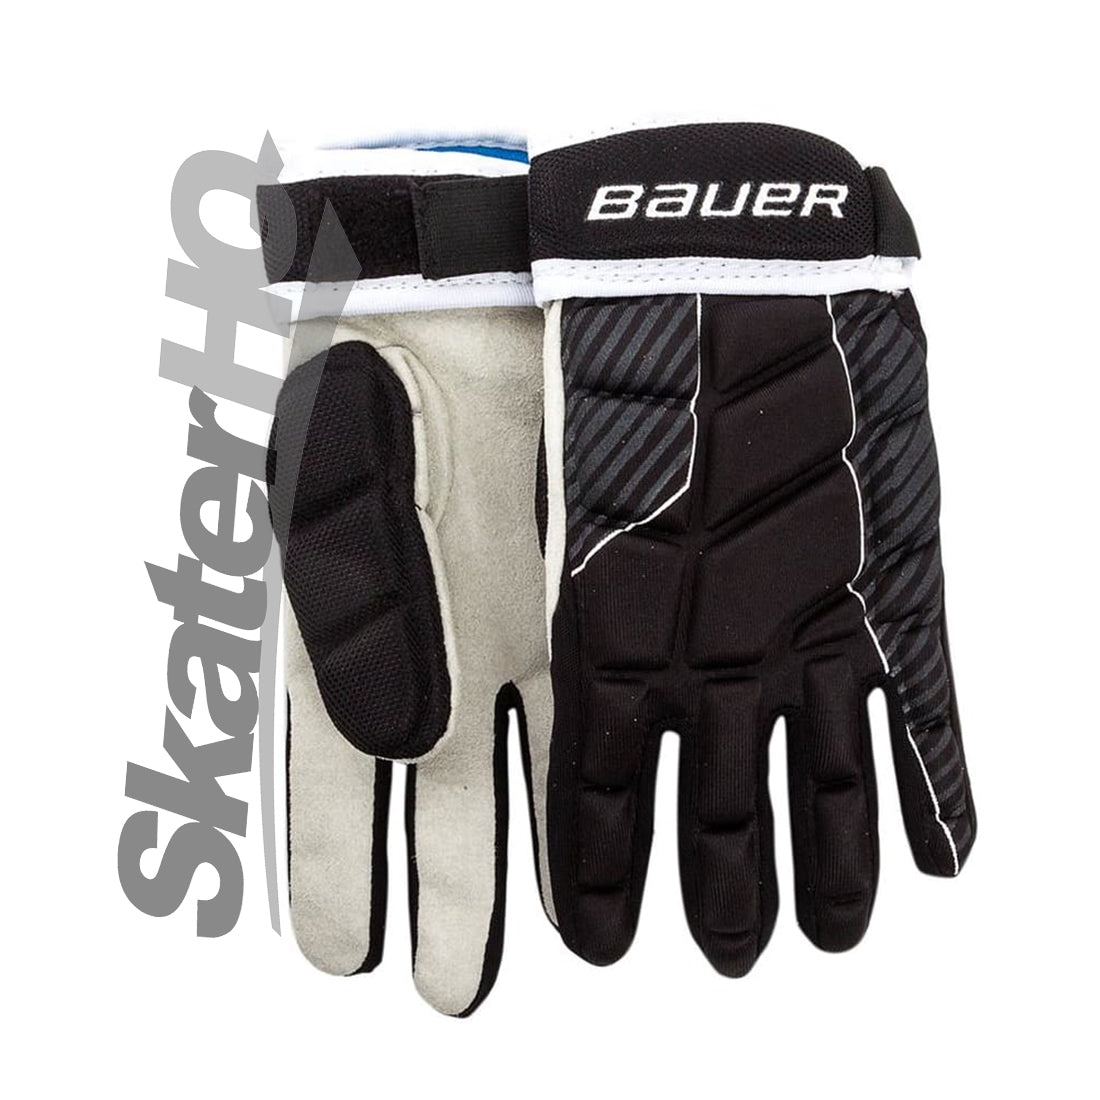 Bauer Performance Player Gloves - Junior/Small Protective Gear